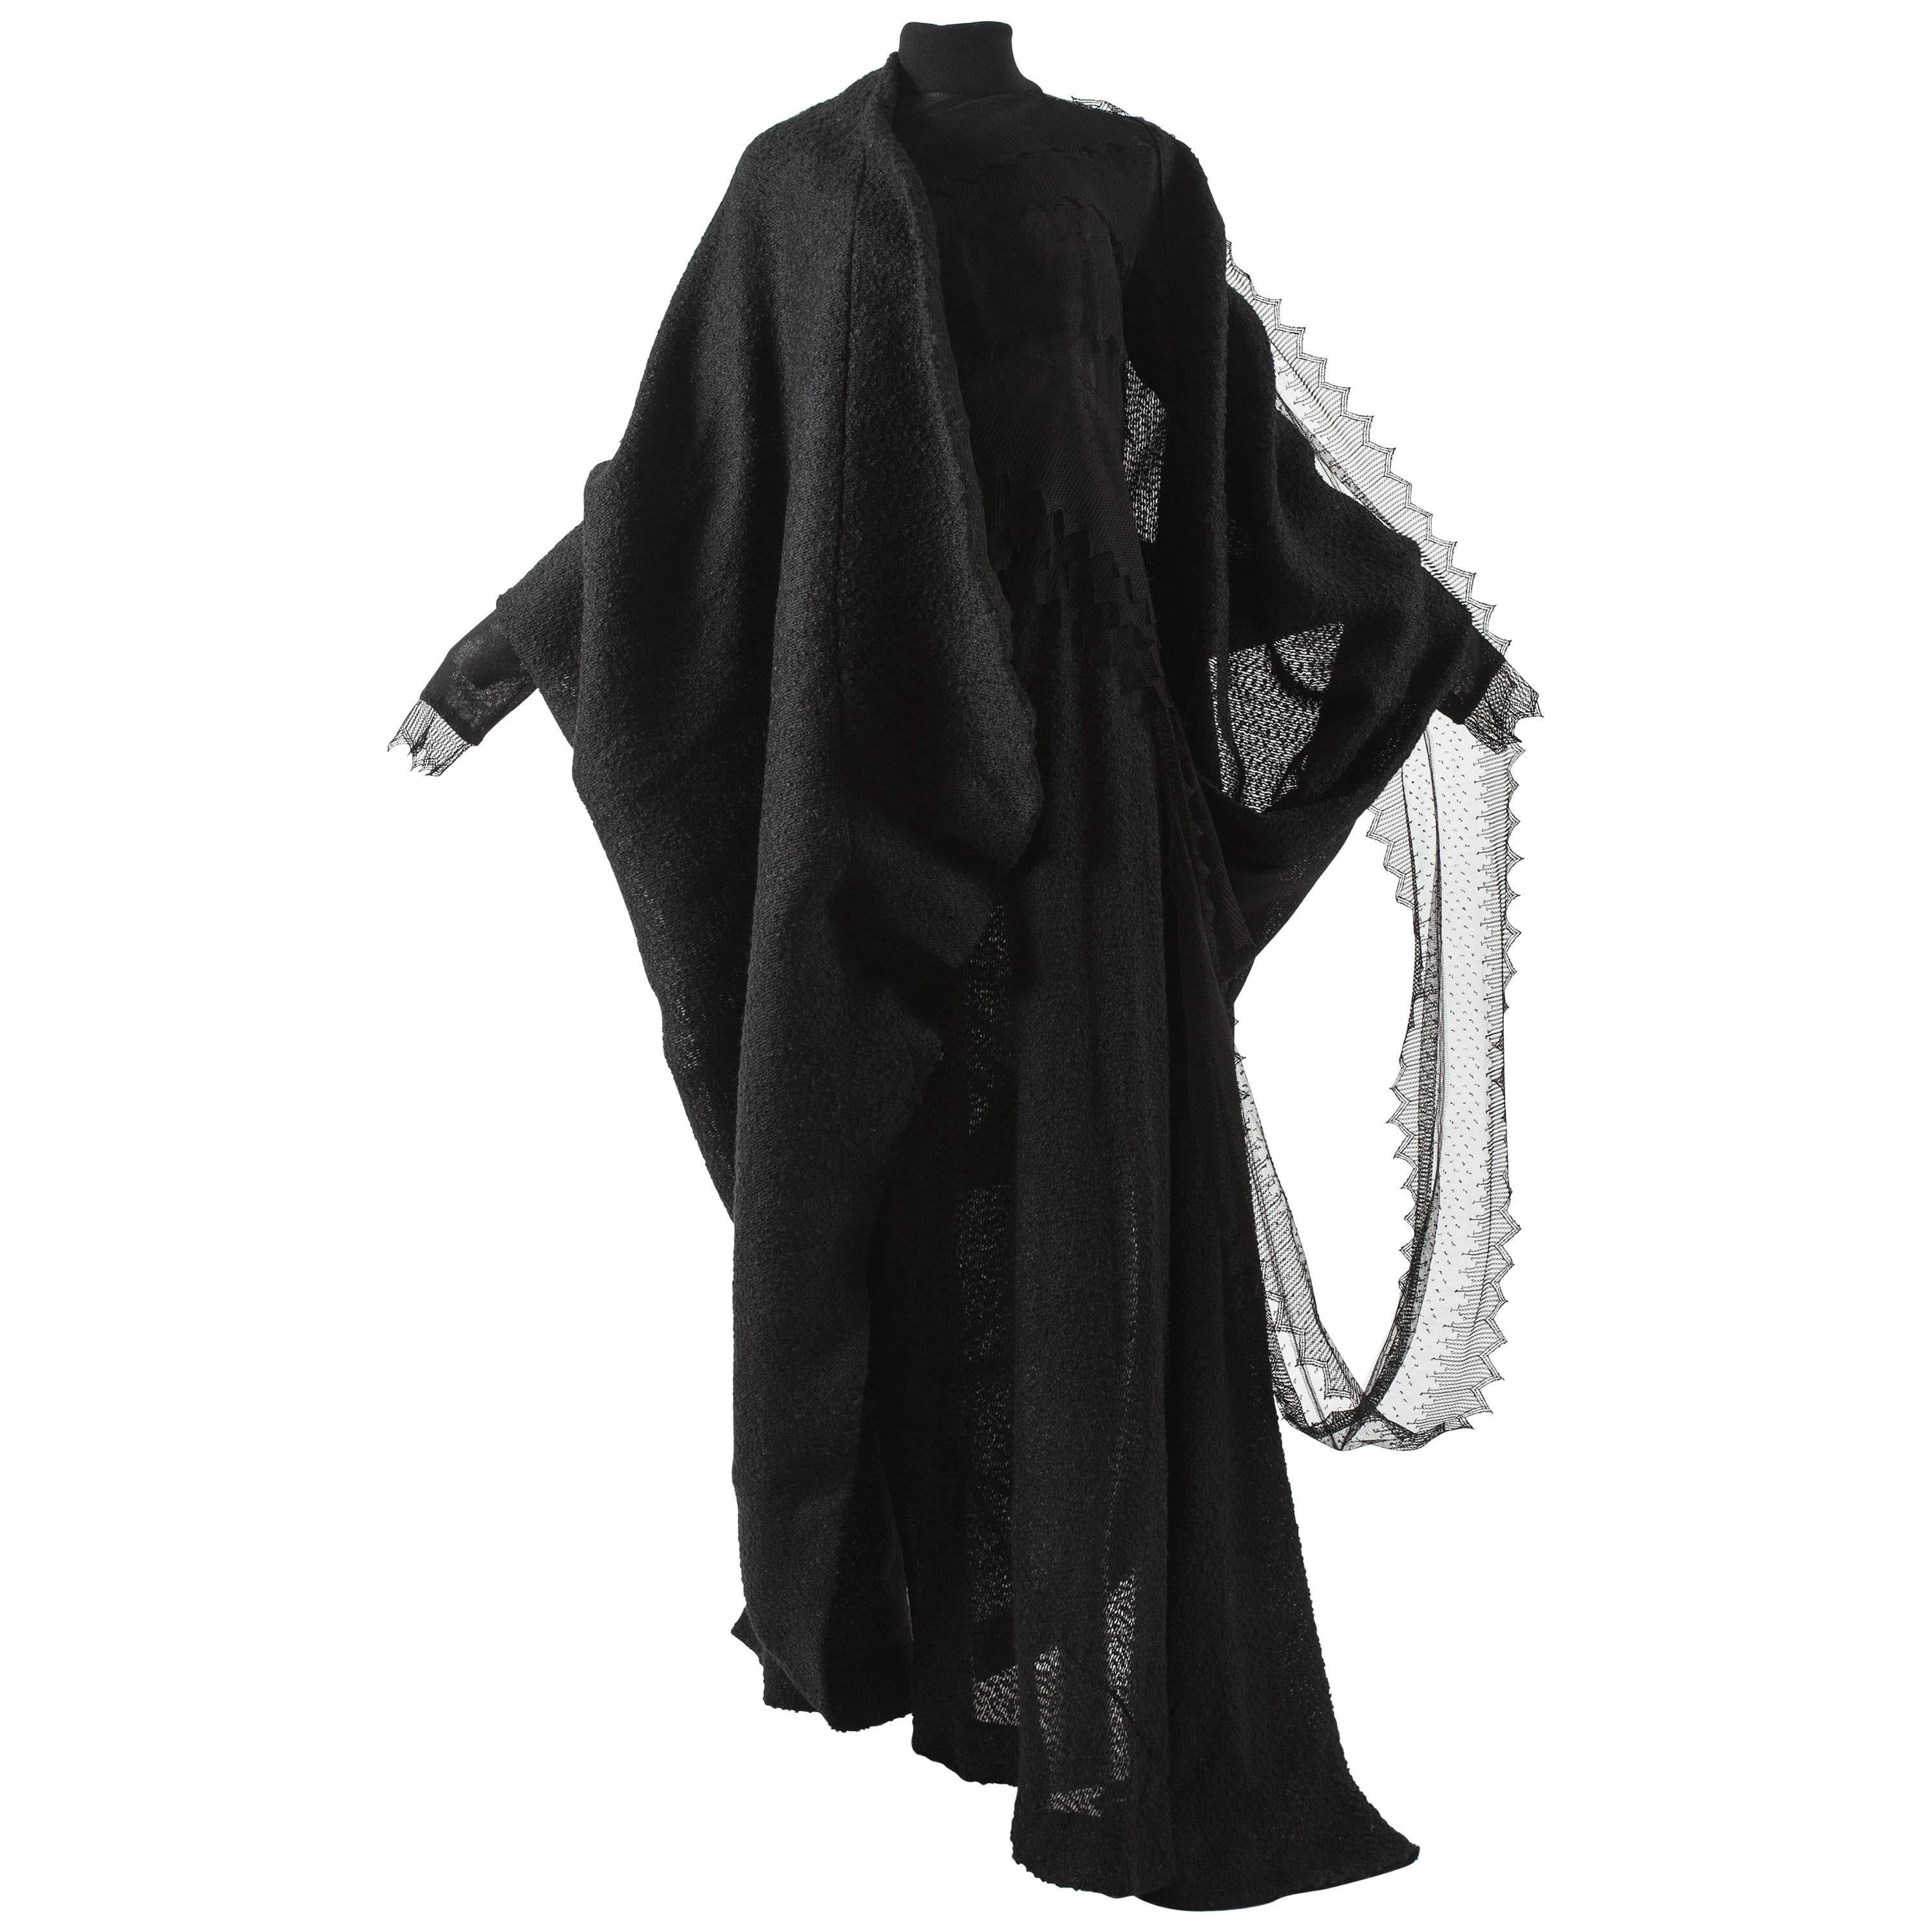 Ocimar Versolato Haute Couture black bouclé wool and knitted lace dress, fw 1998 For Sale